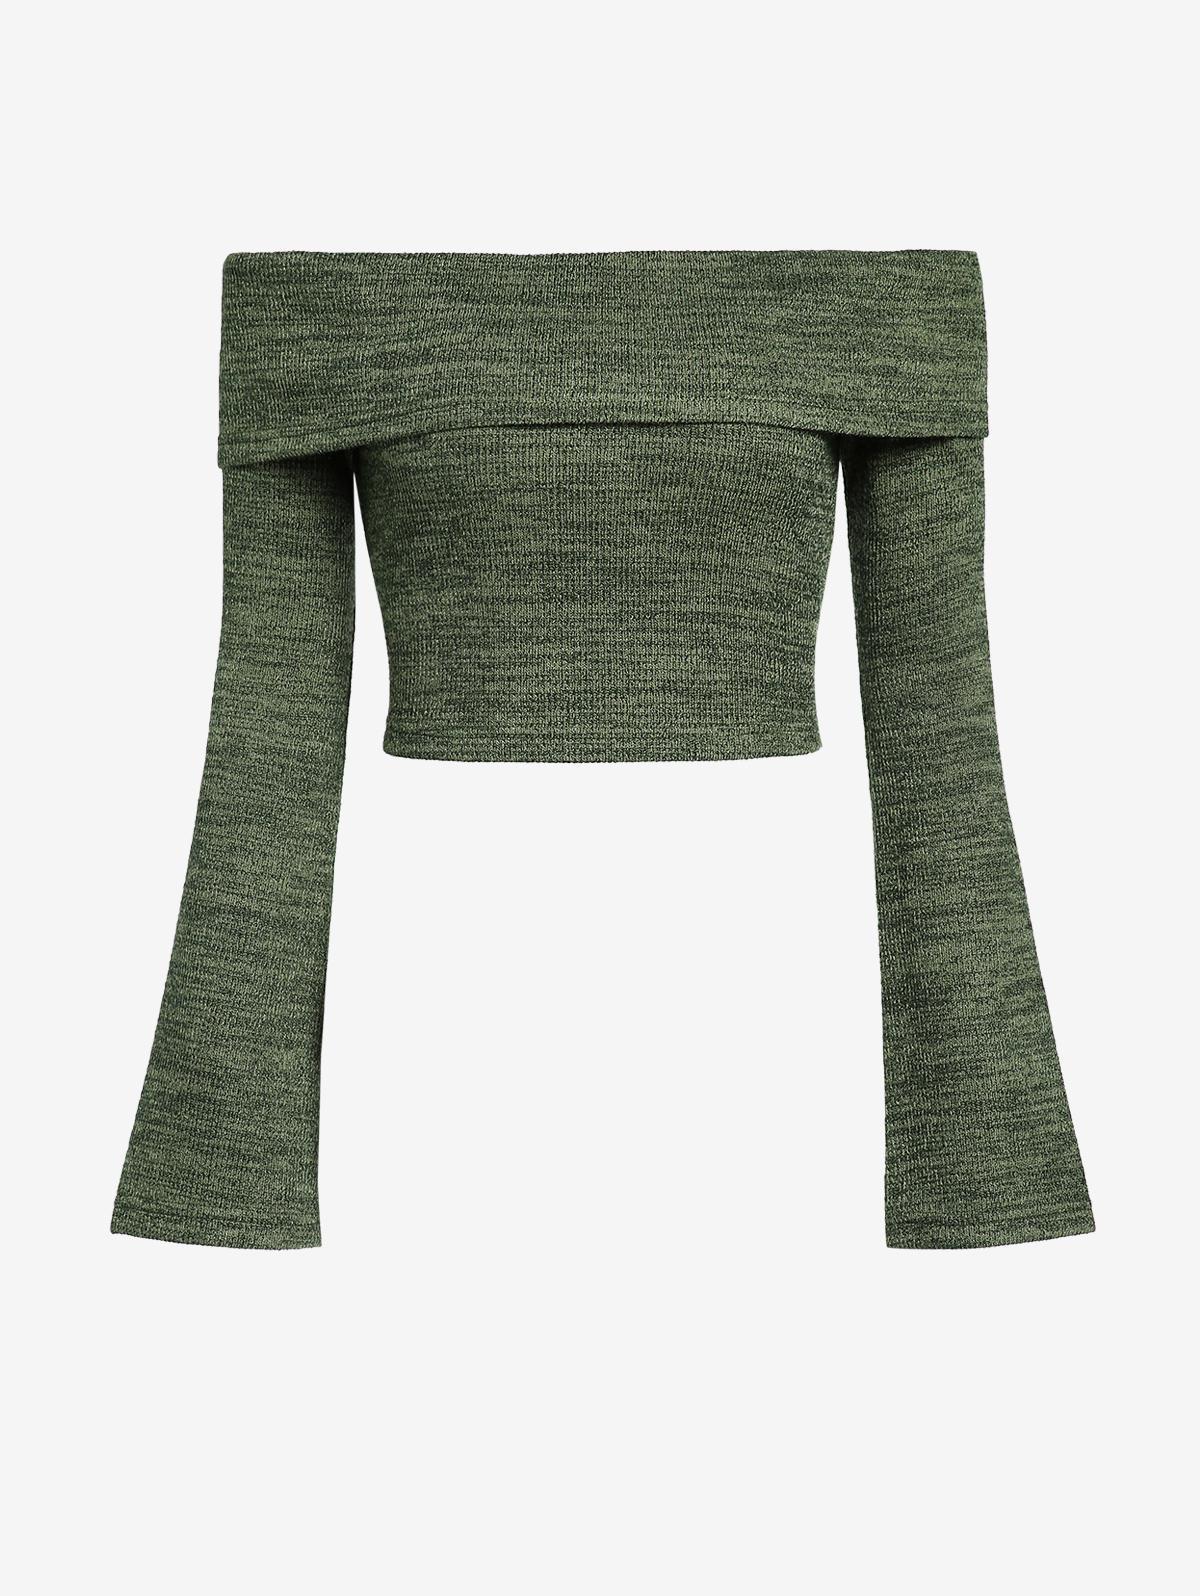 Zaful Sexy Going Out Off Shoulder Foldover Heathered Flare Long Sleeves  Slim Fit Crop Jersey T Shirt in Green | Lyst UK